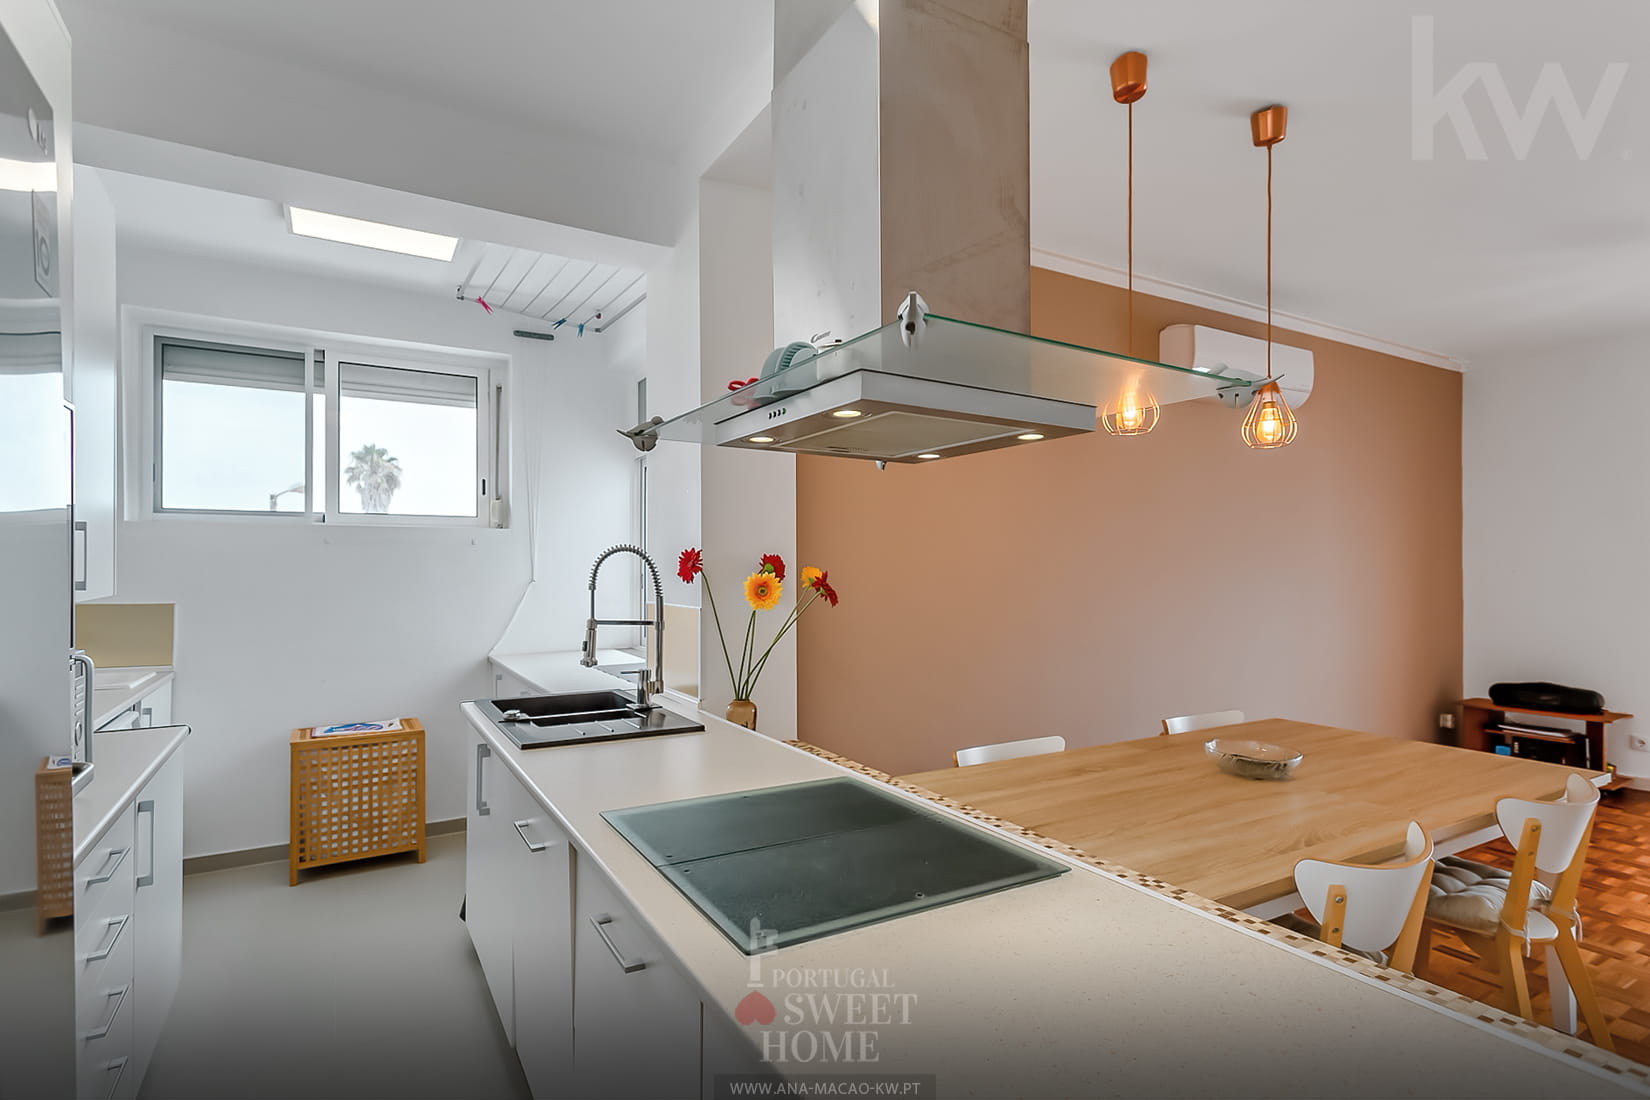 Kitchen (13.5 m²) fully equipped and open to the living room